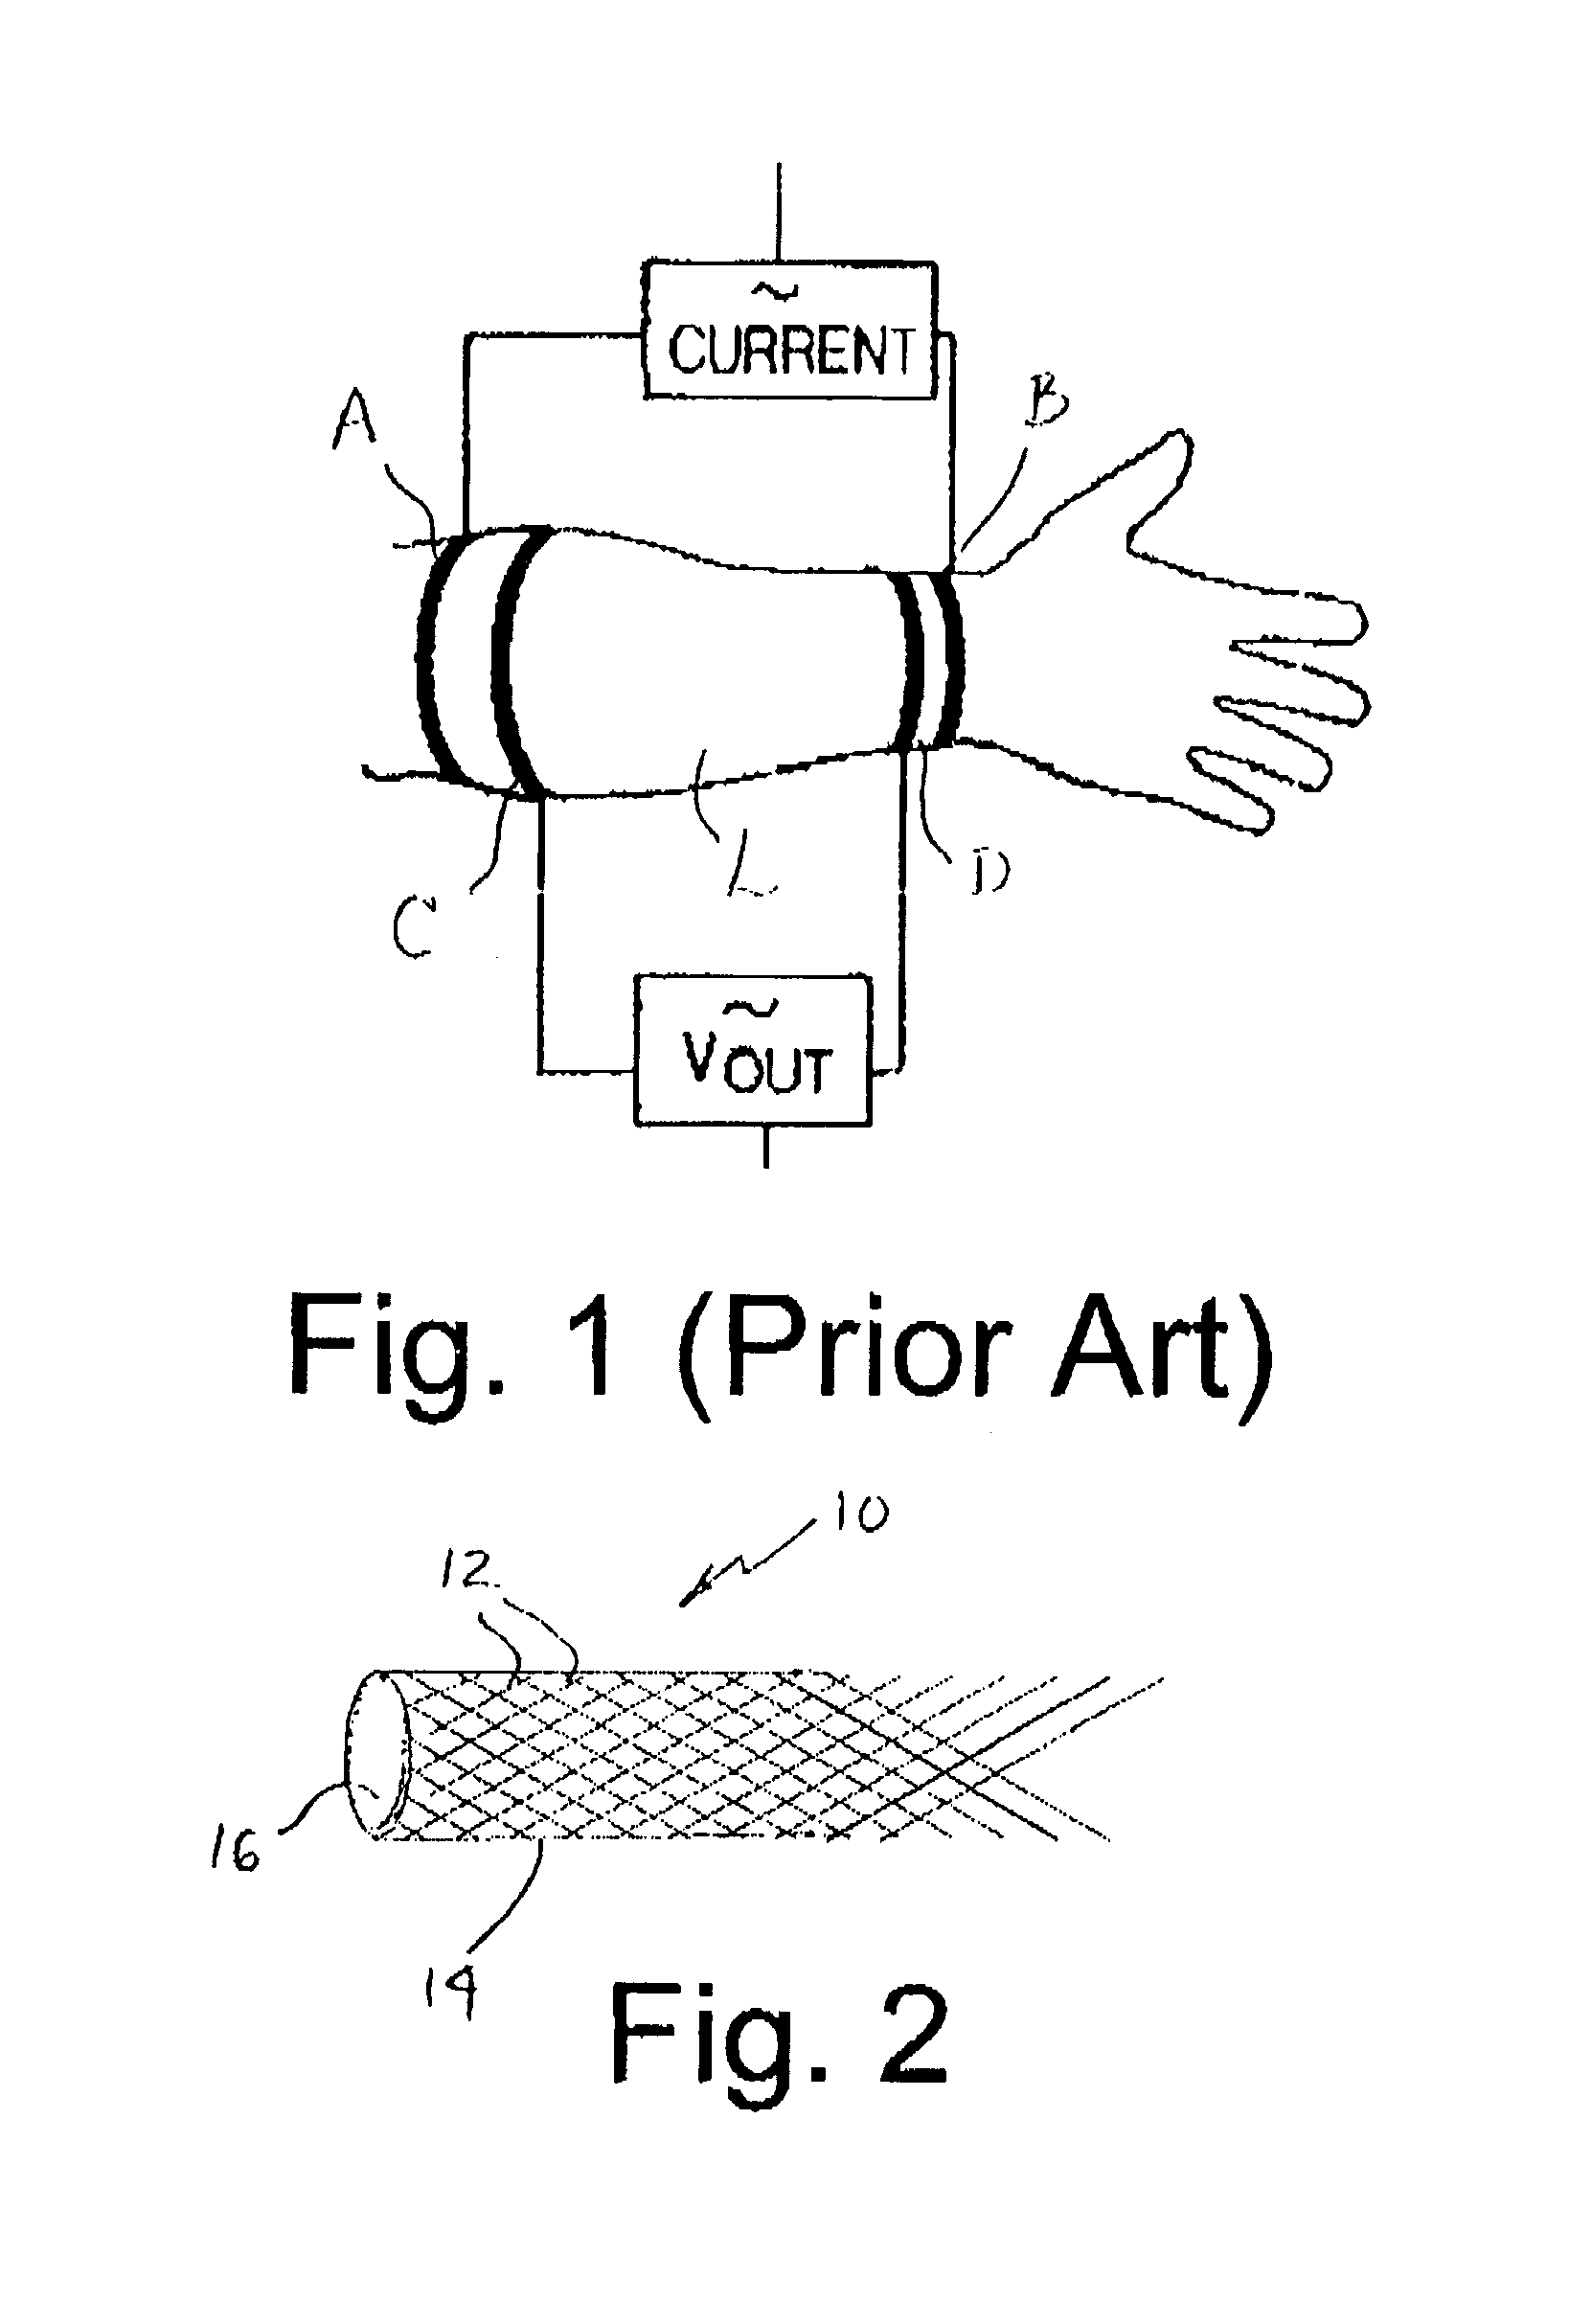 Stretchable electrode and method of making physiologic measurements